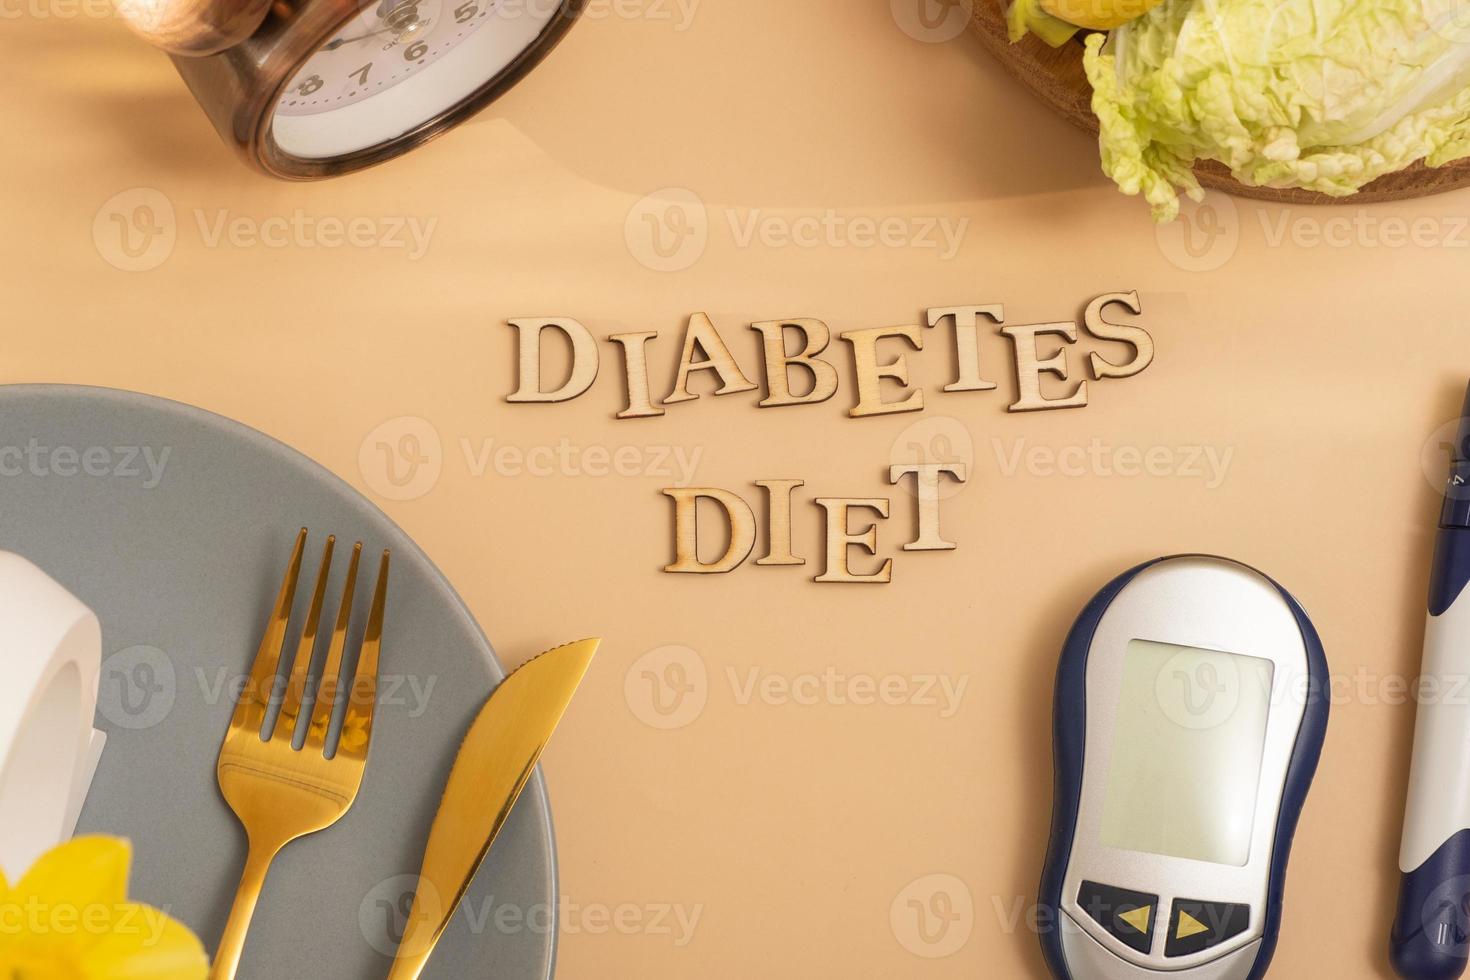 Diabetes diet text with plate and cutlery, glucose meter on beige background flat lay, top view photo